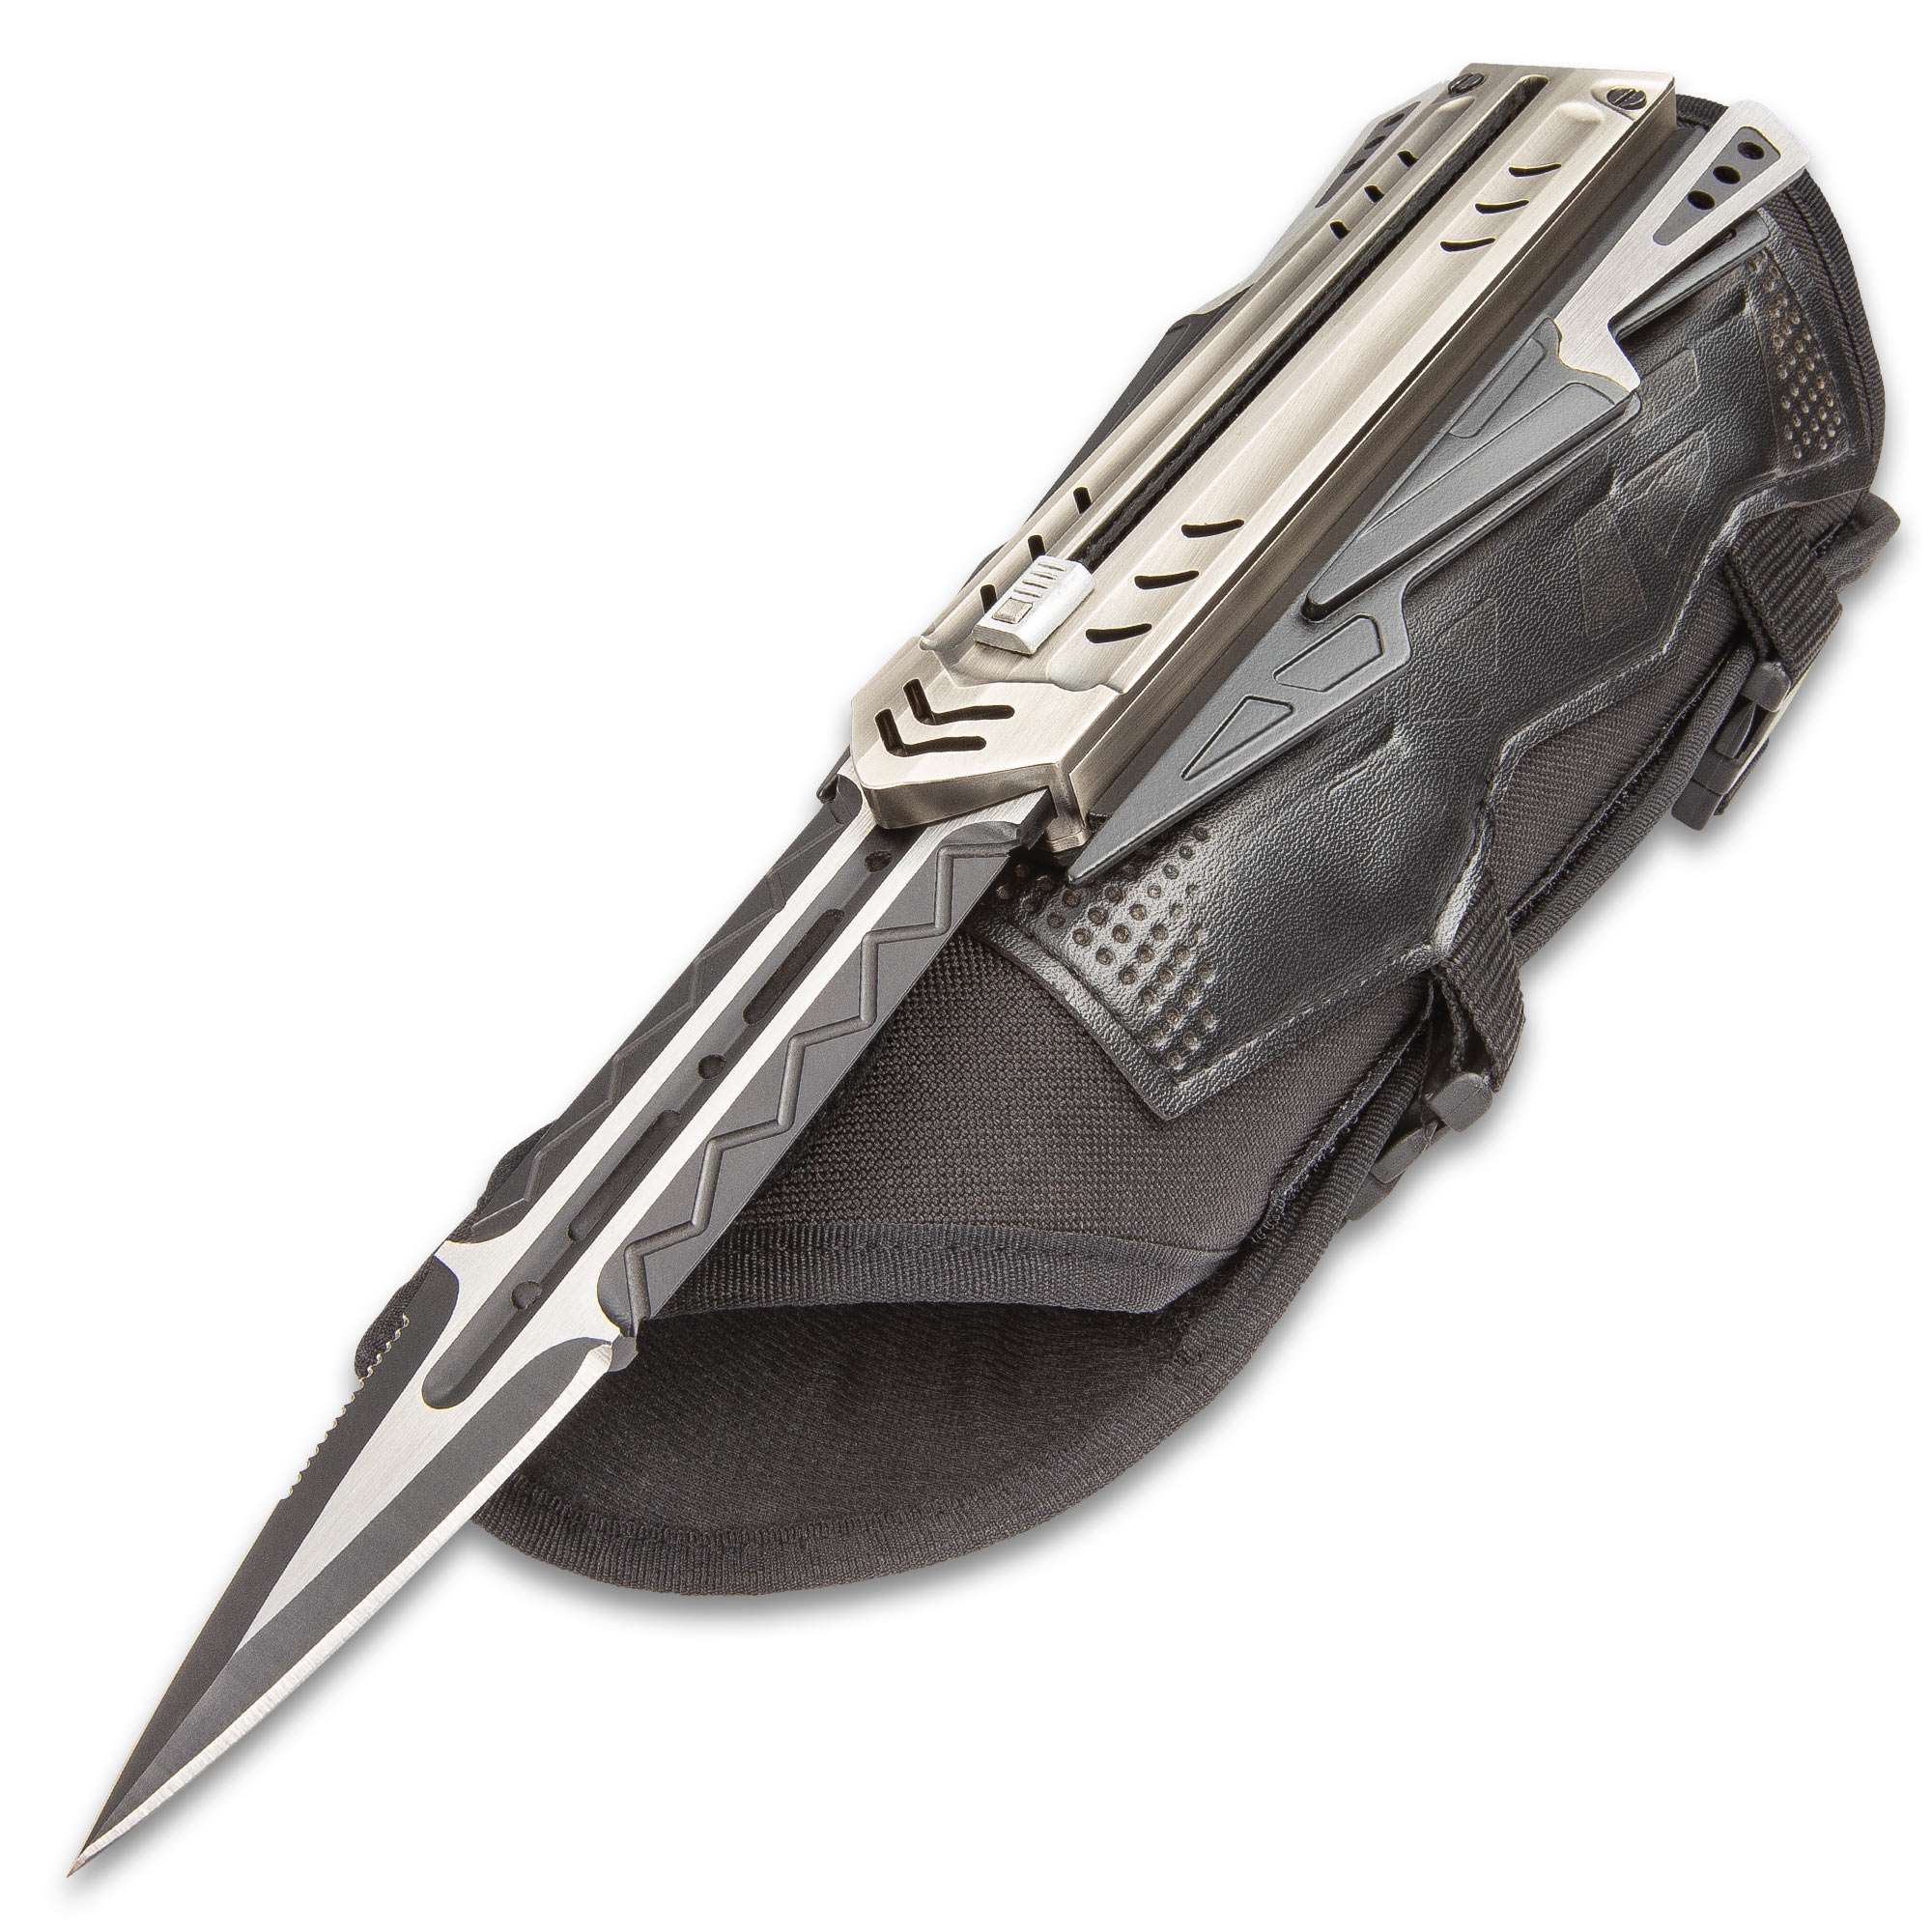 The Enforcer - Tactical Gauntlet with hidden blade and throwing knives